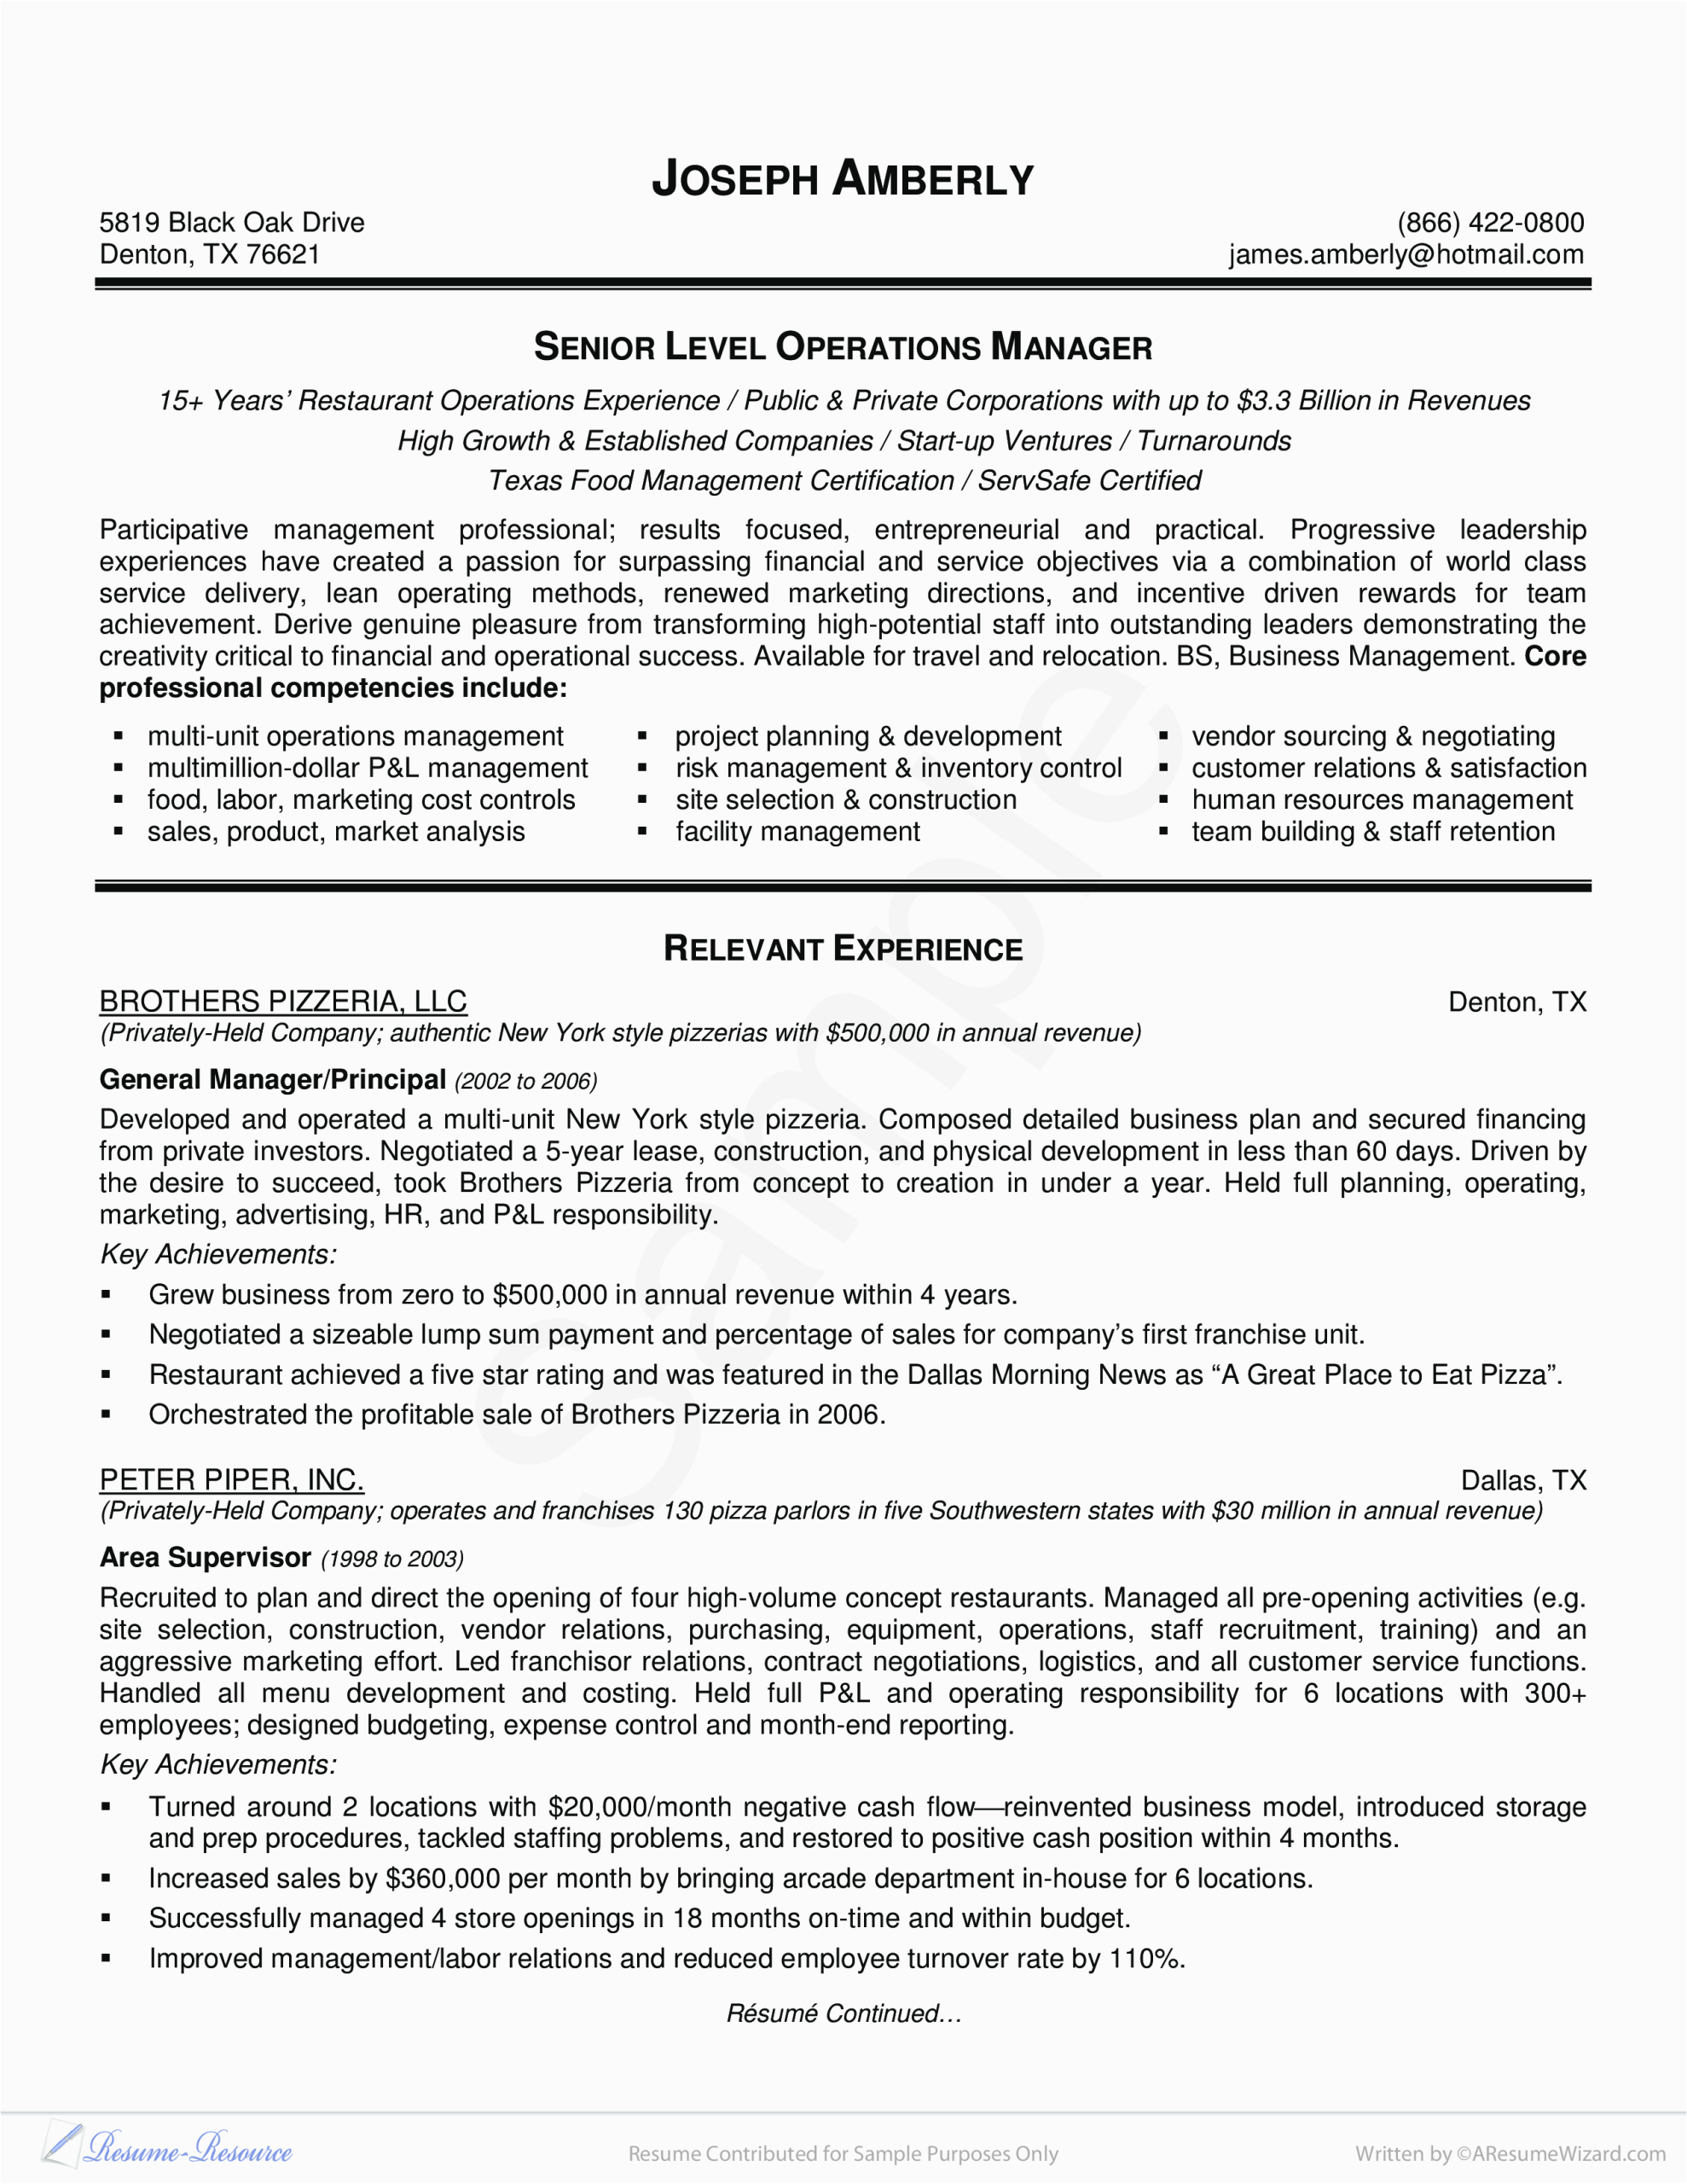 Sample Resume format for Operations Manager Operations Manager Resume Sample